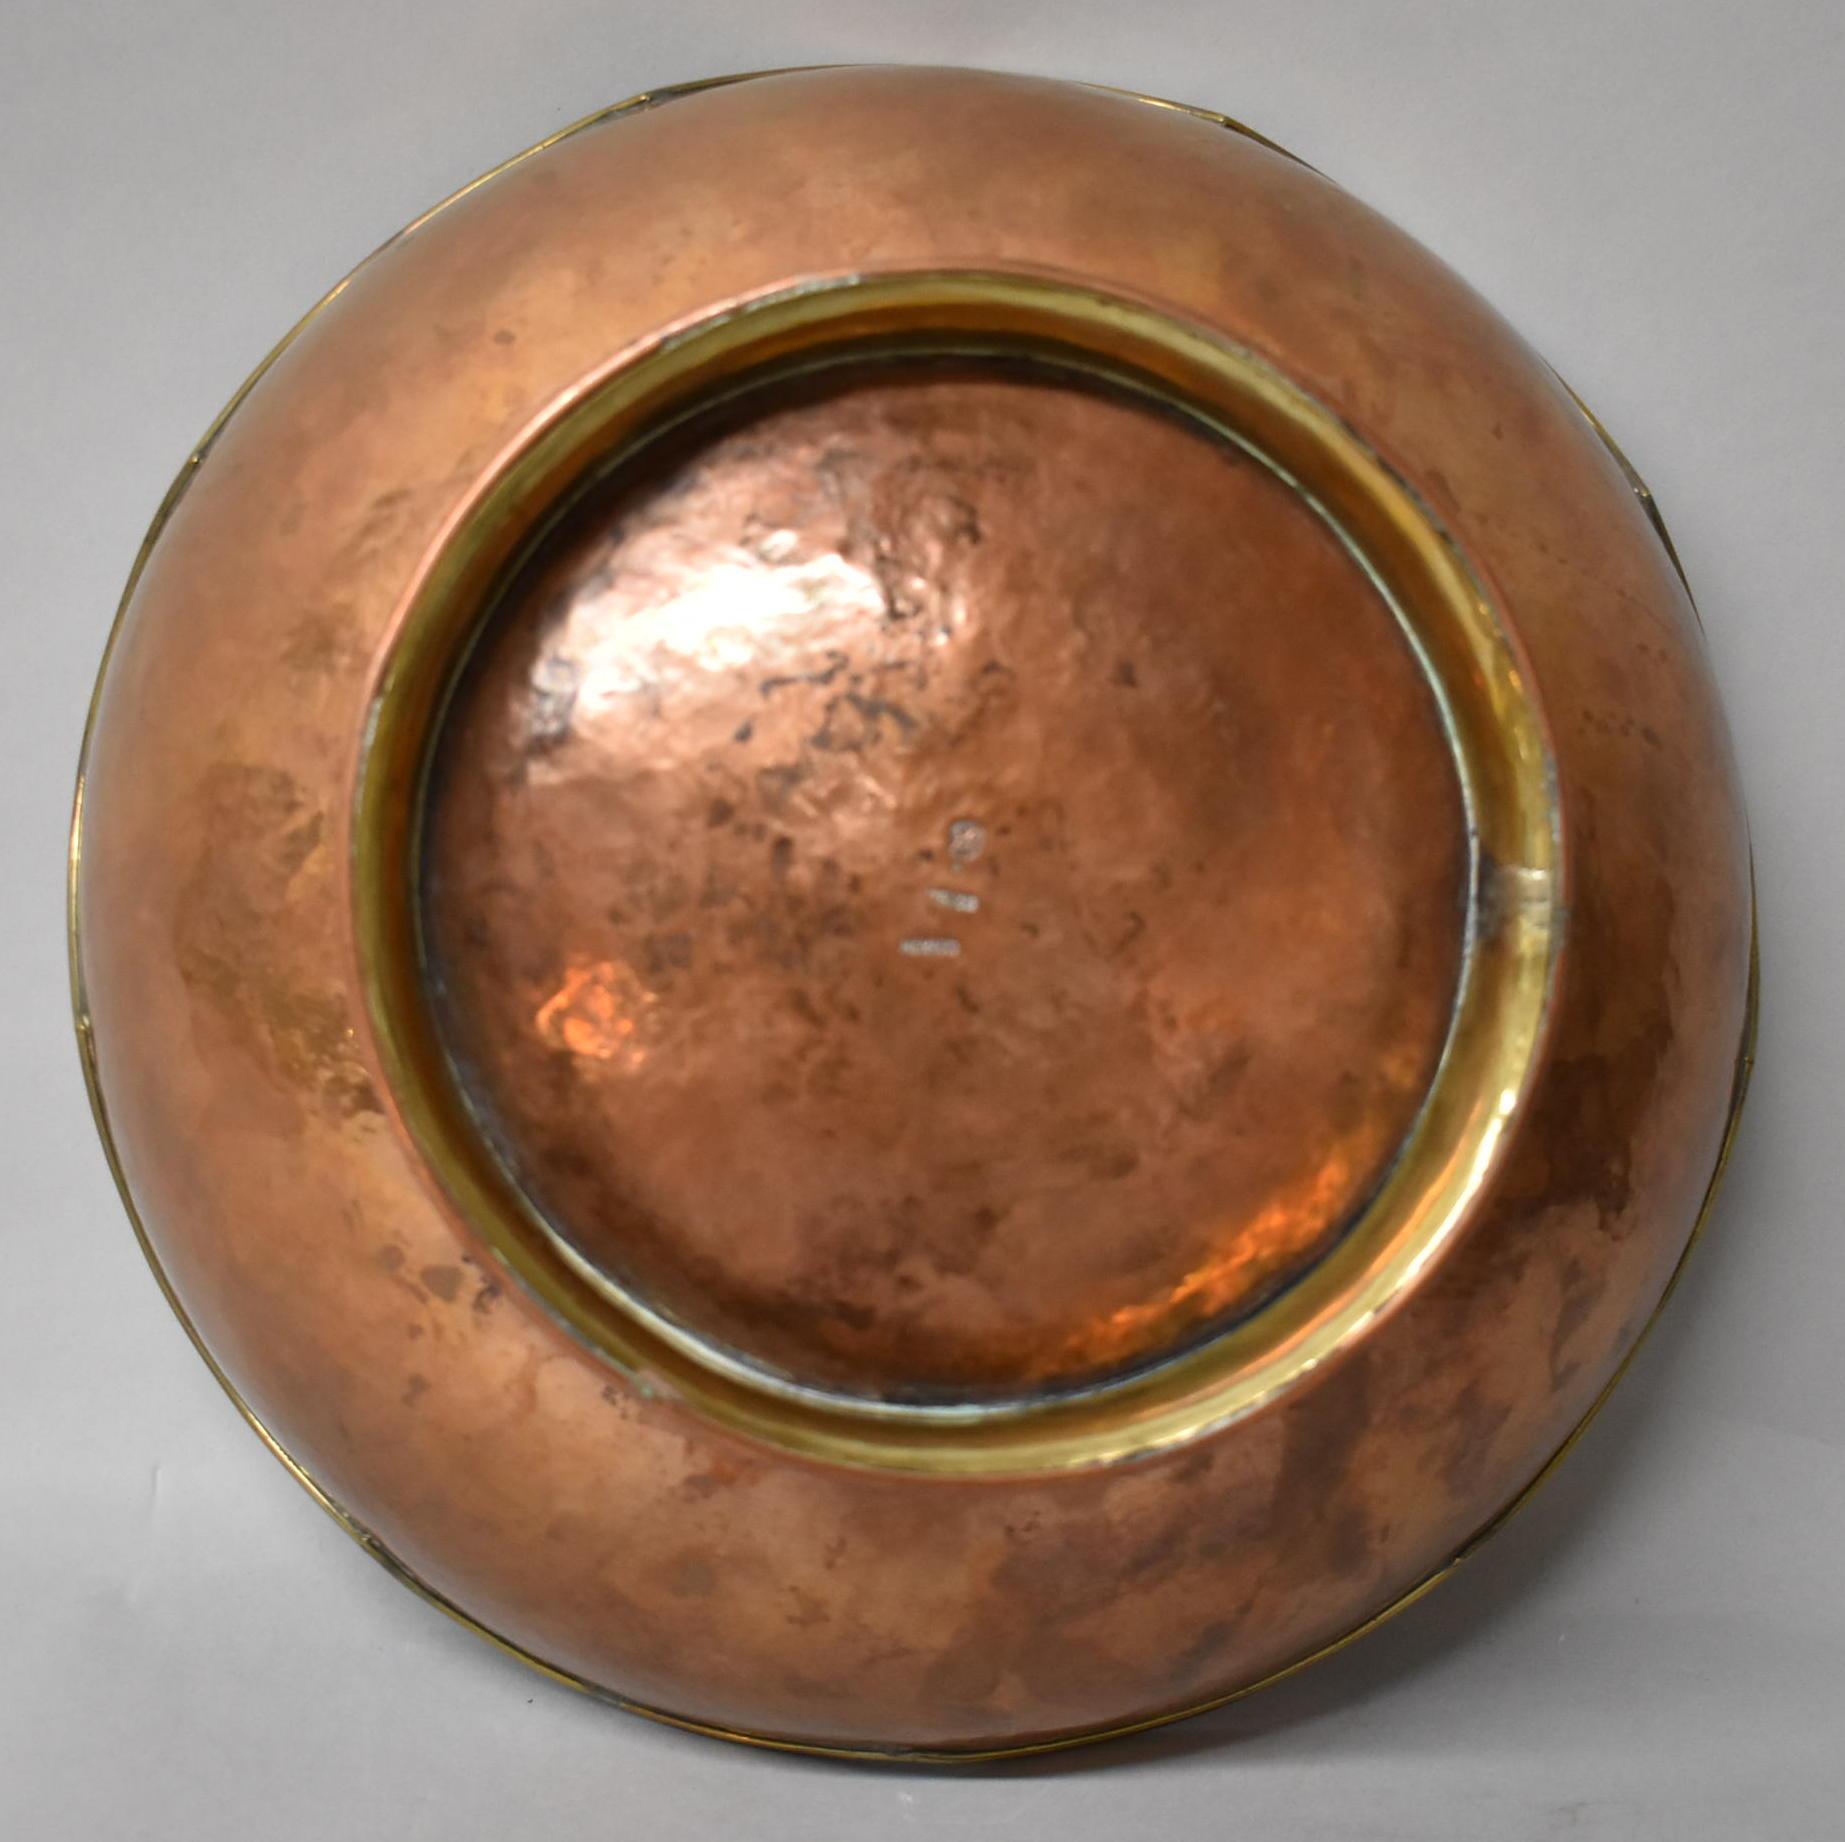 Hector Aquilar Taxco Mexico copper and brass scalloped bowl. Nice aged patina.